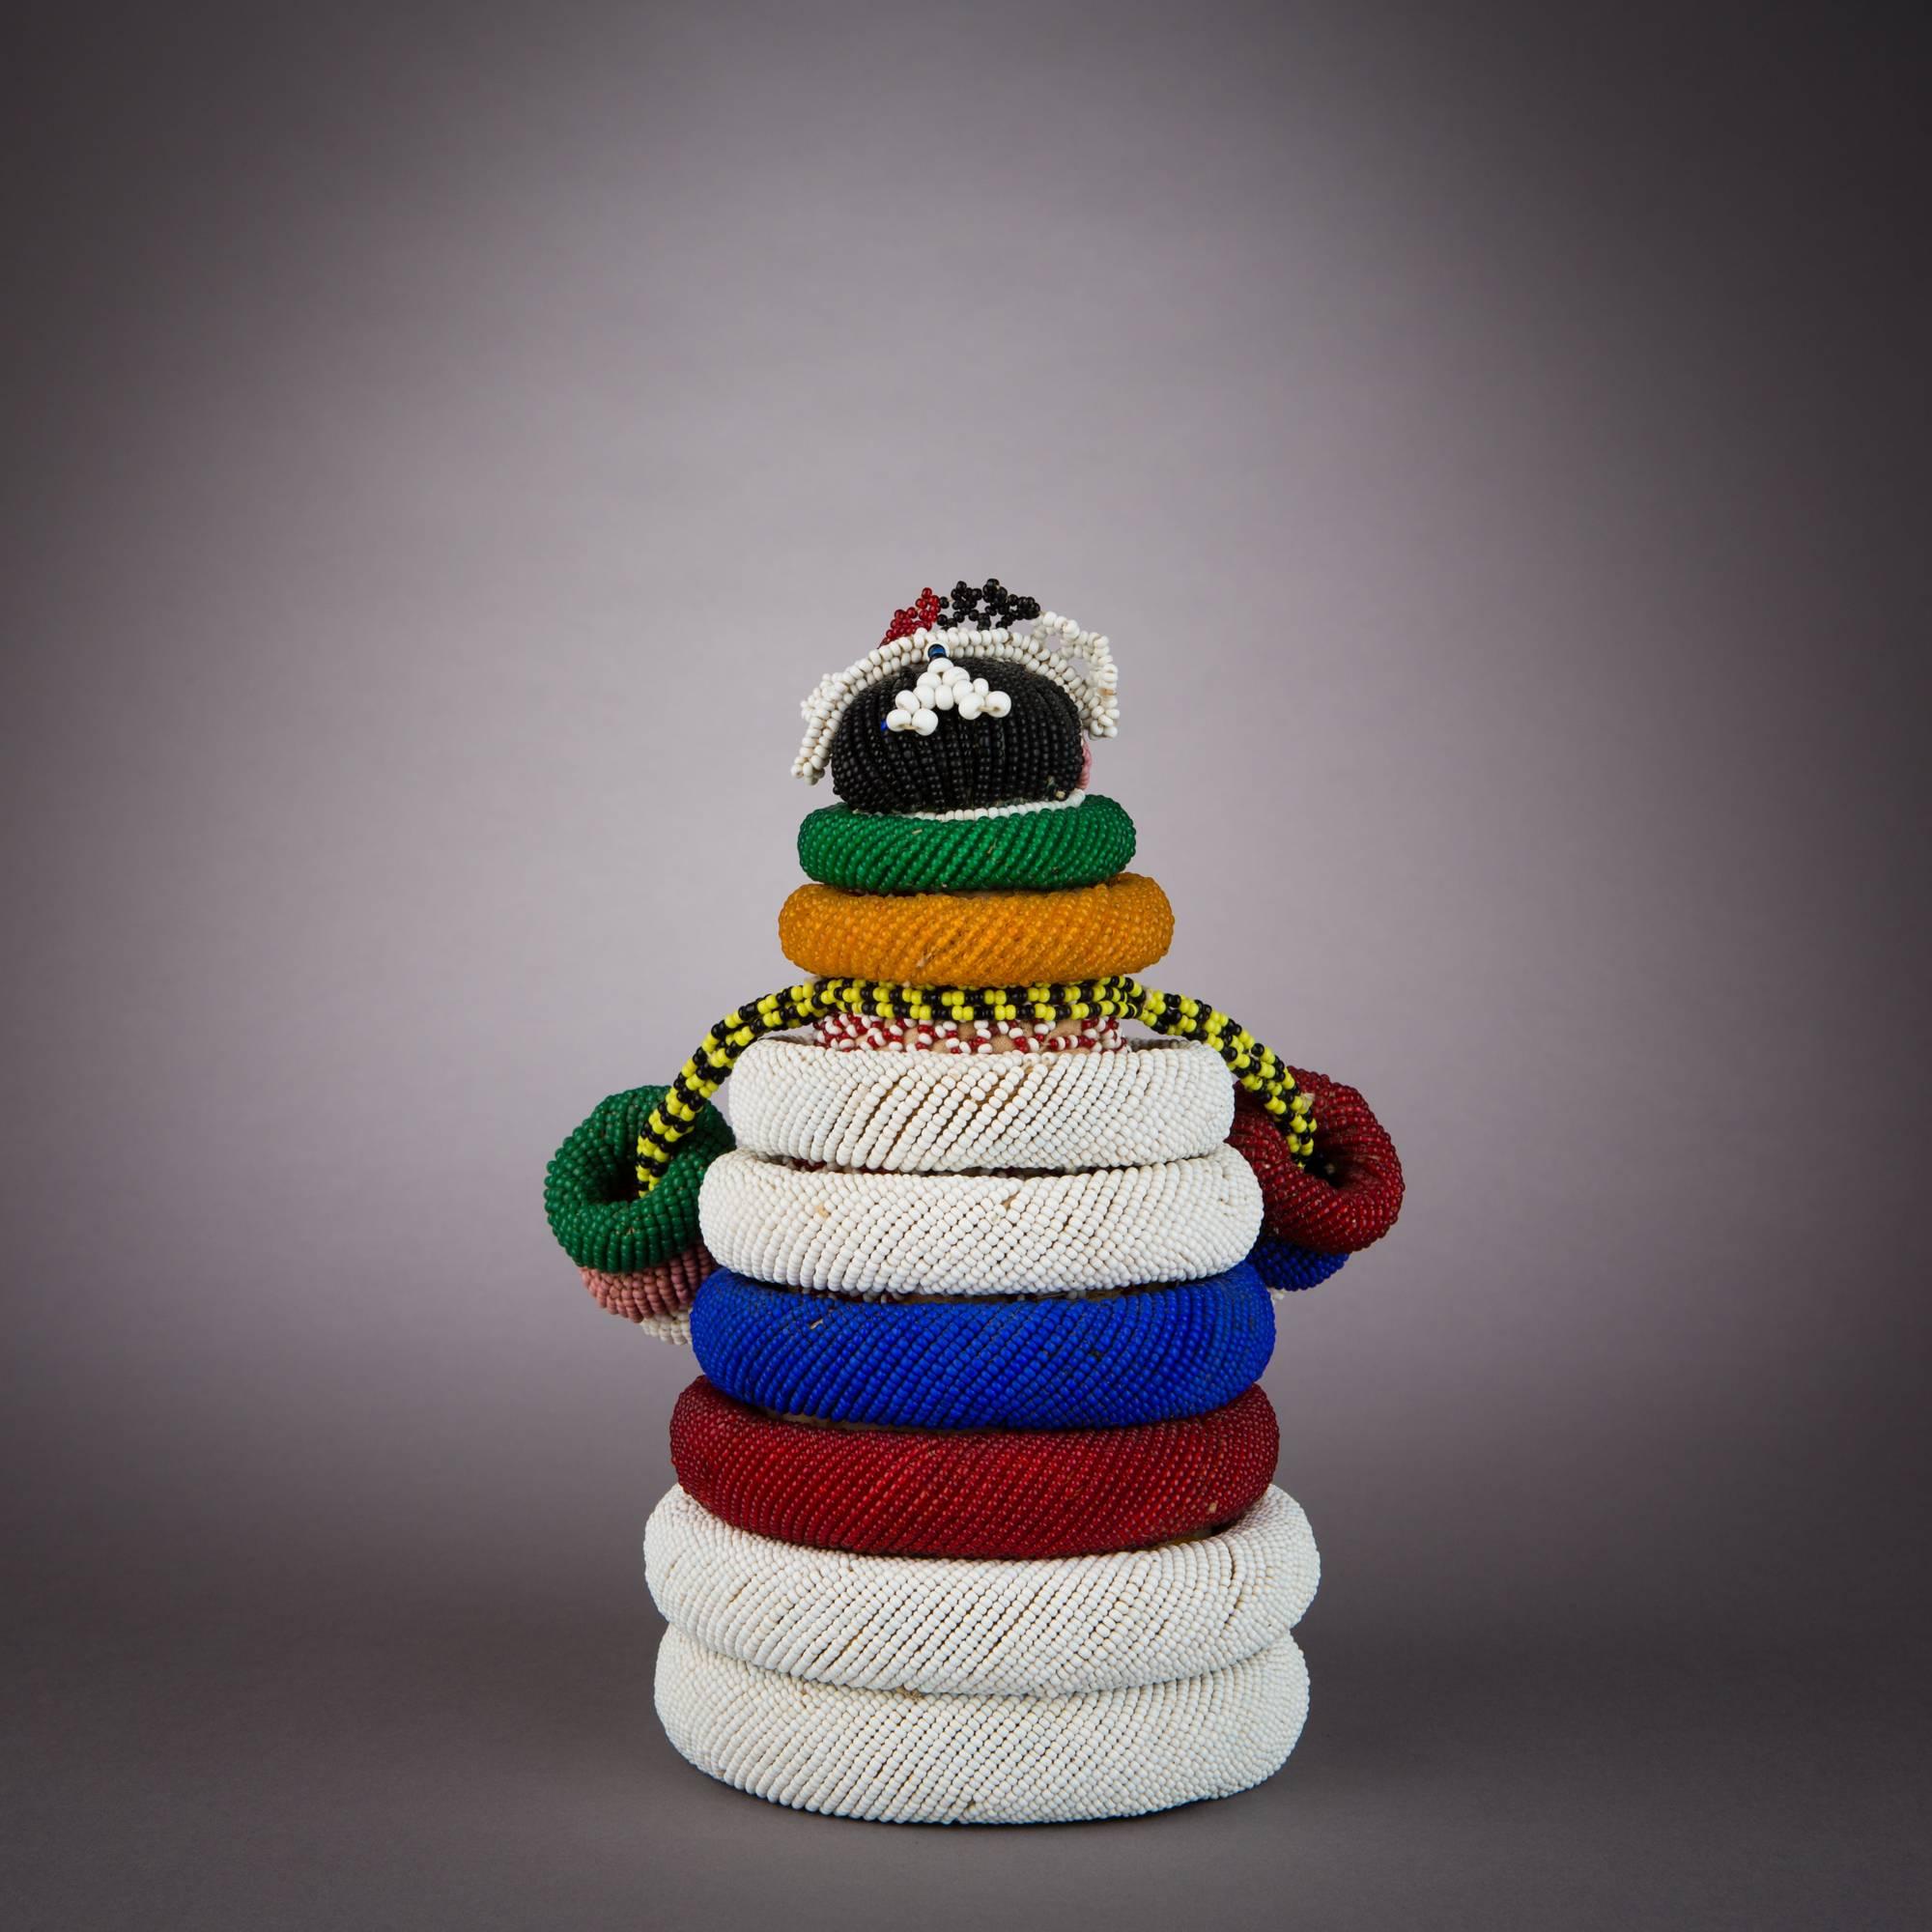 Ndebele beaded fertility dolls are given to young girls when they attend initiation school. The doll is cared for and cherished until the woman's first pregnancy. According to custom, the child figure must be given away, sold or destroyed after the